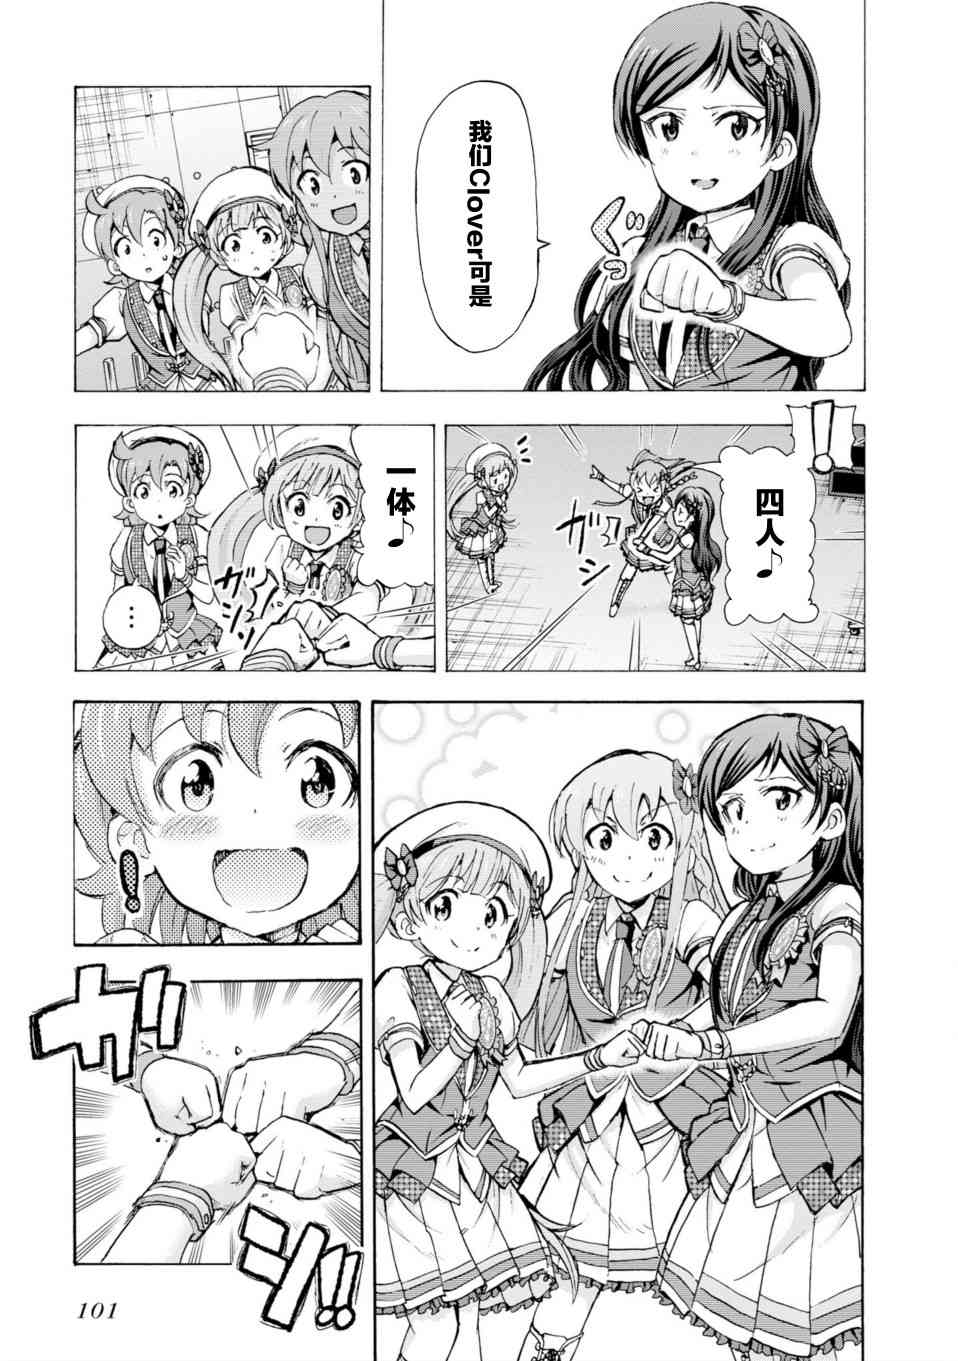 THE IDOLM@STER MILLION LIVE! Blooming Clover - 17話 - 5